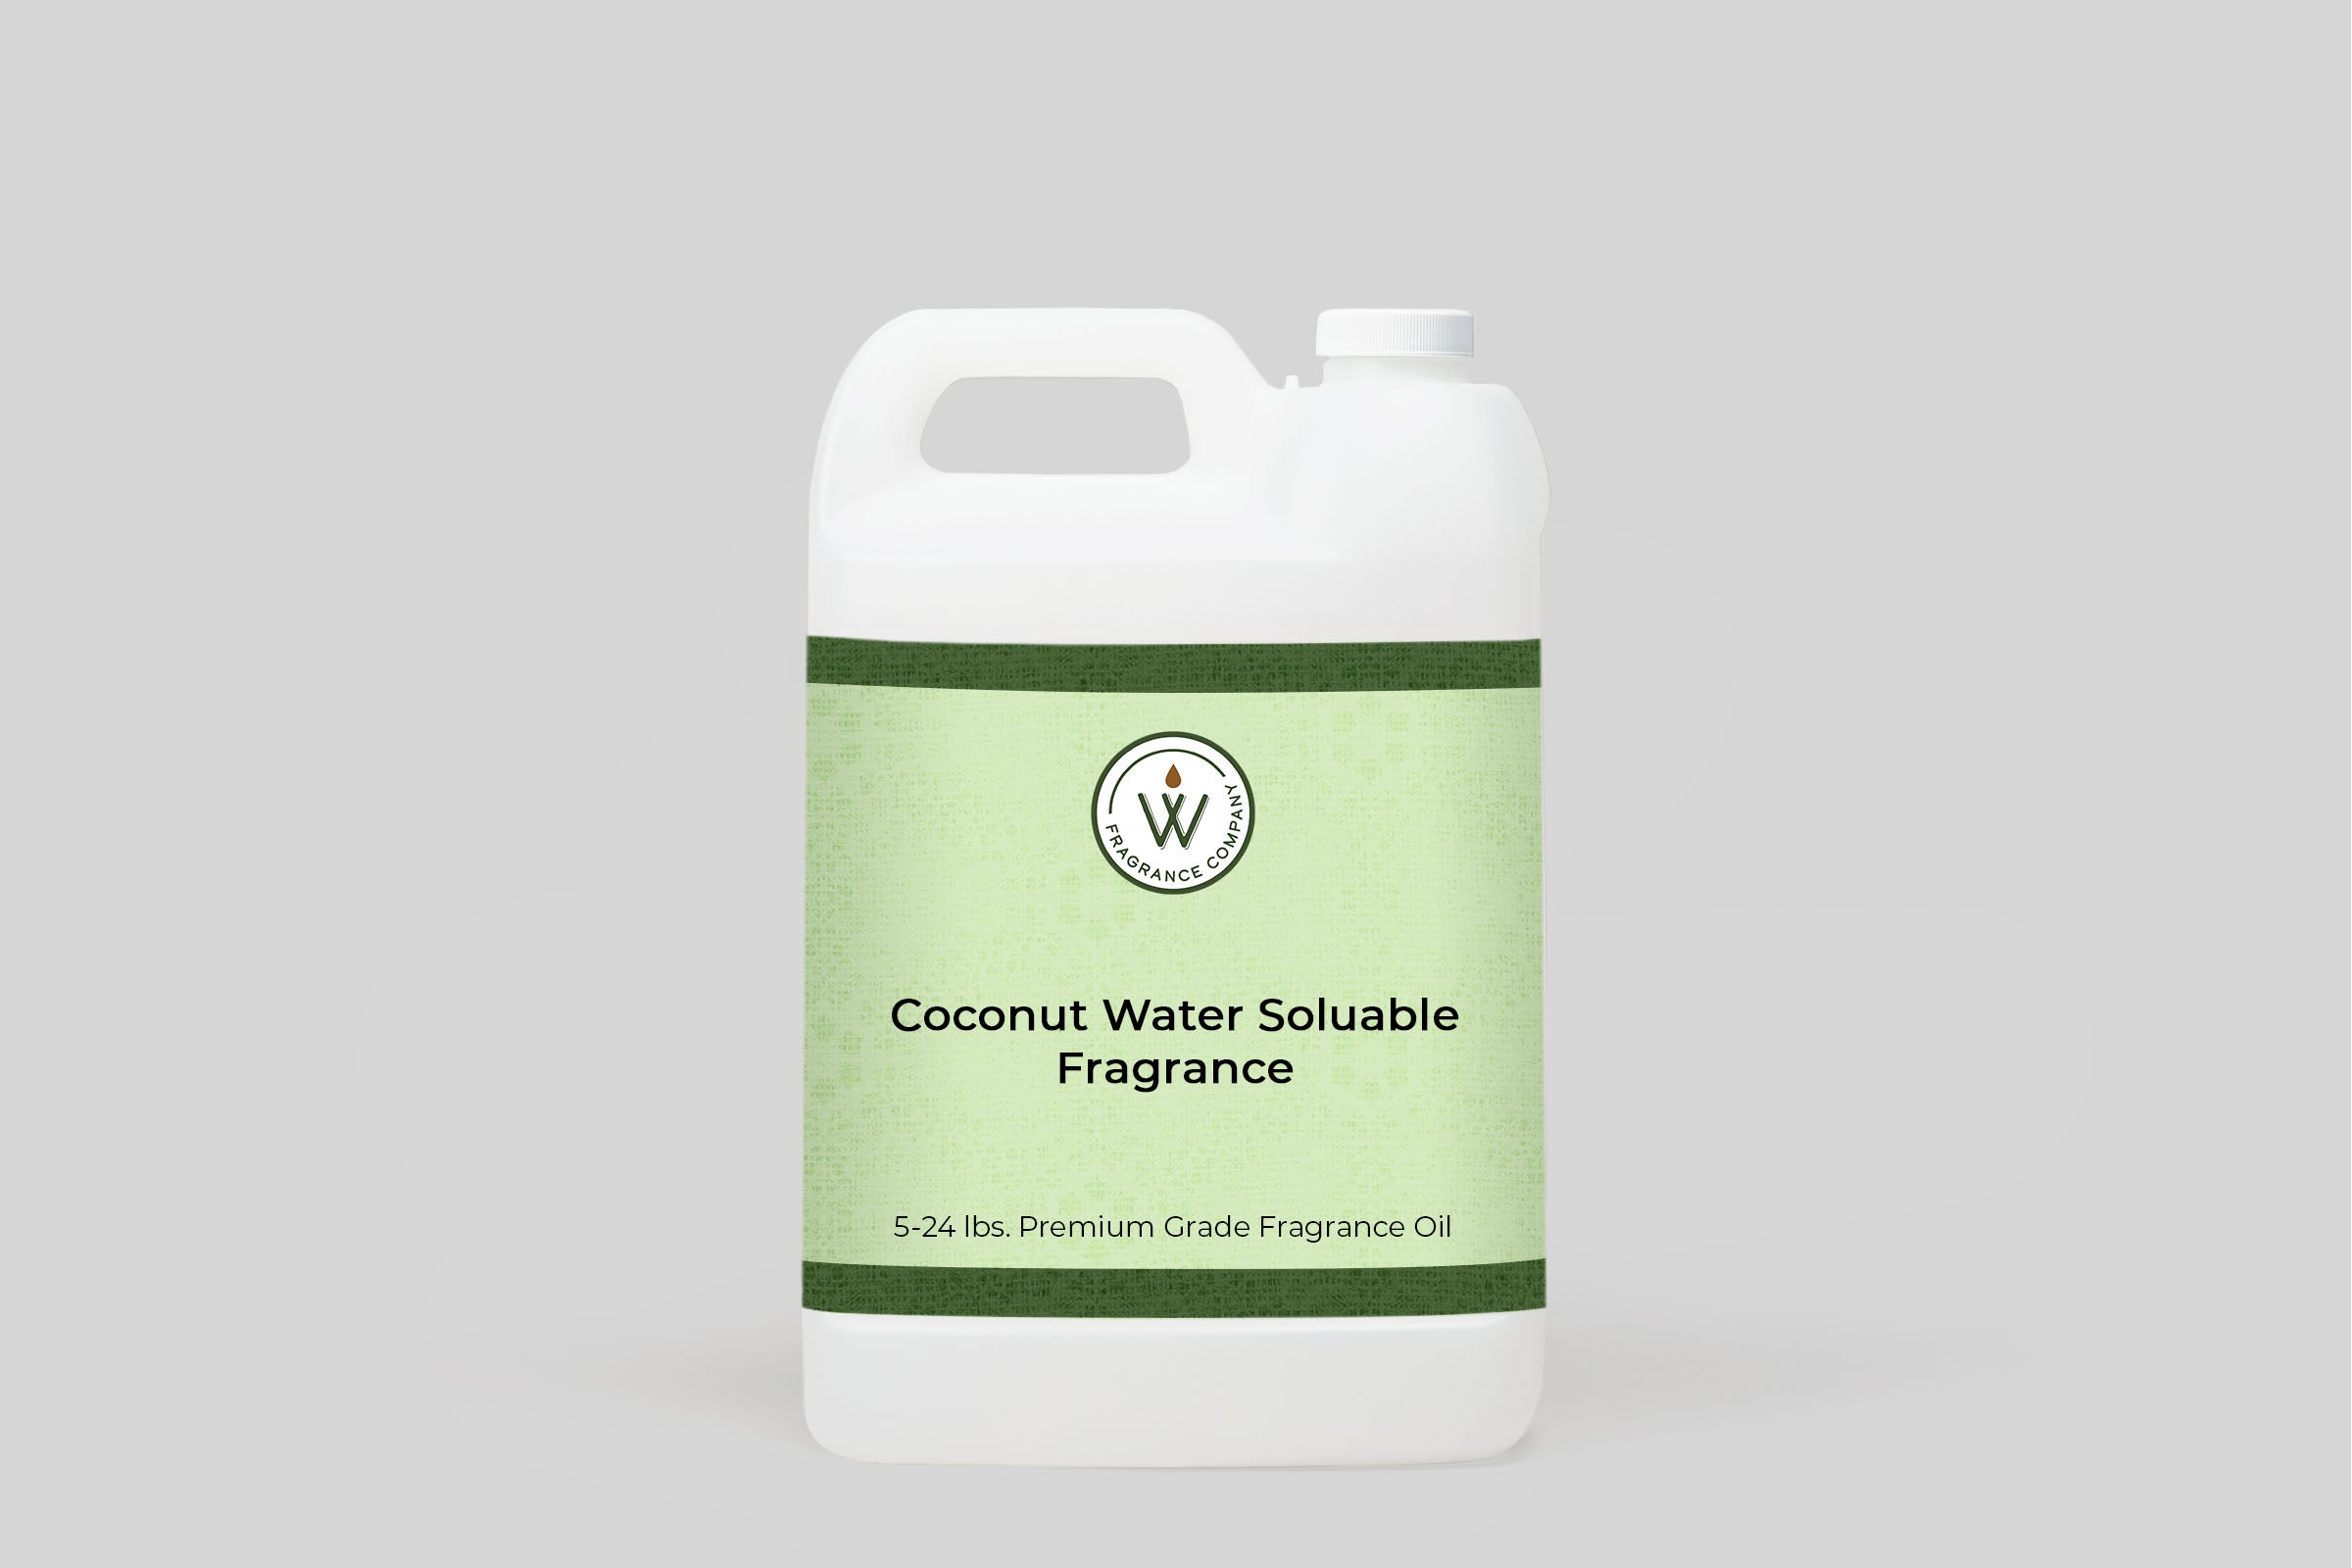 Coconut Water Soluble Fragrance